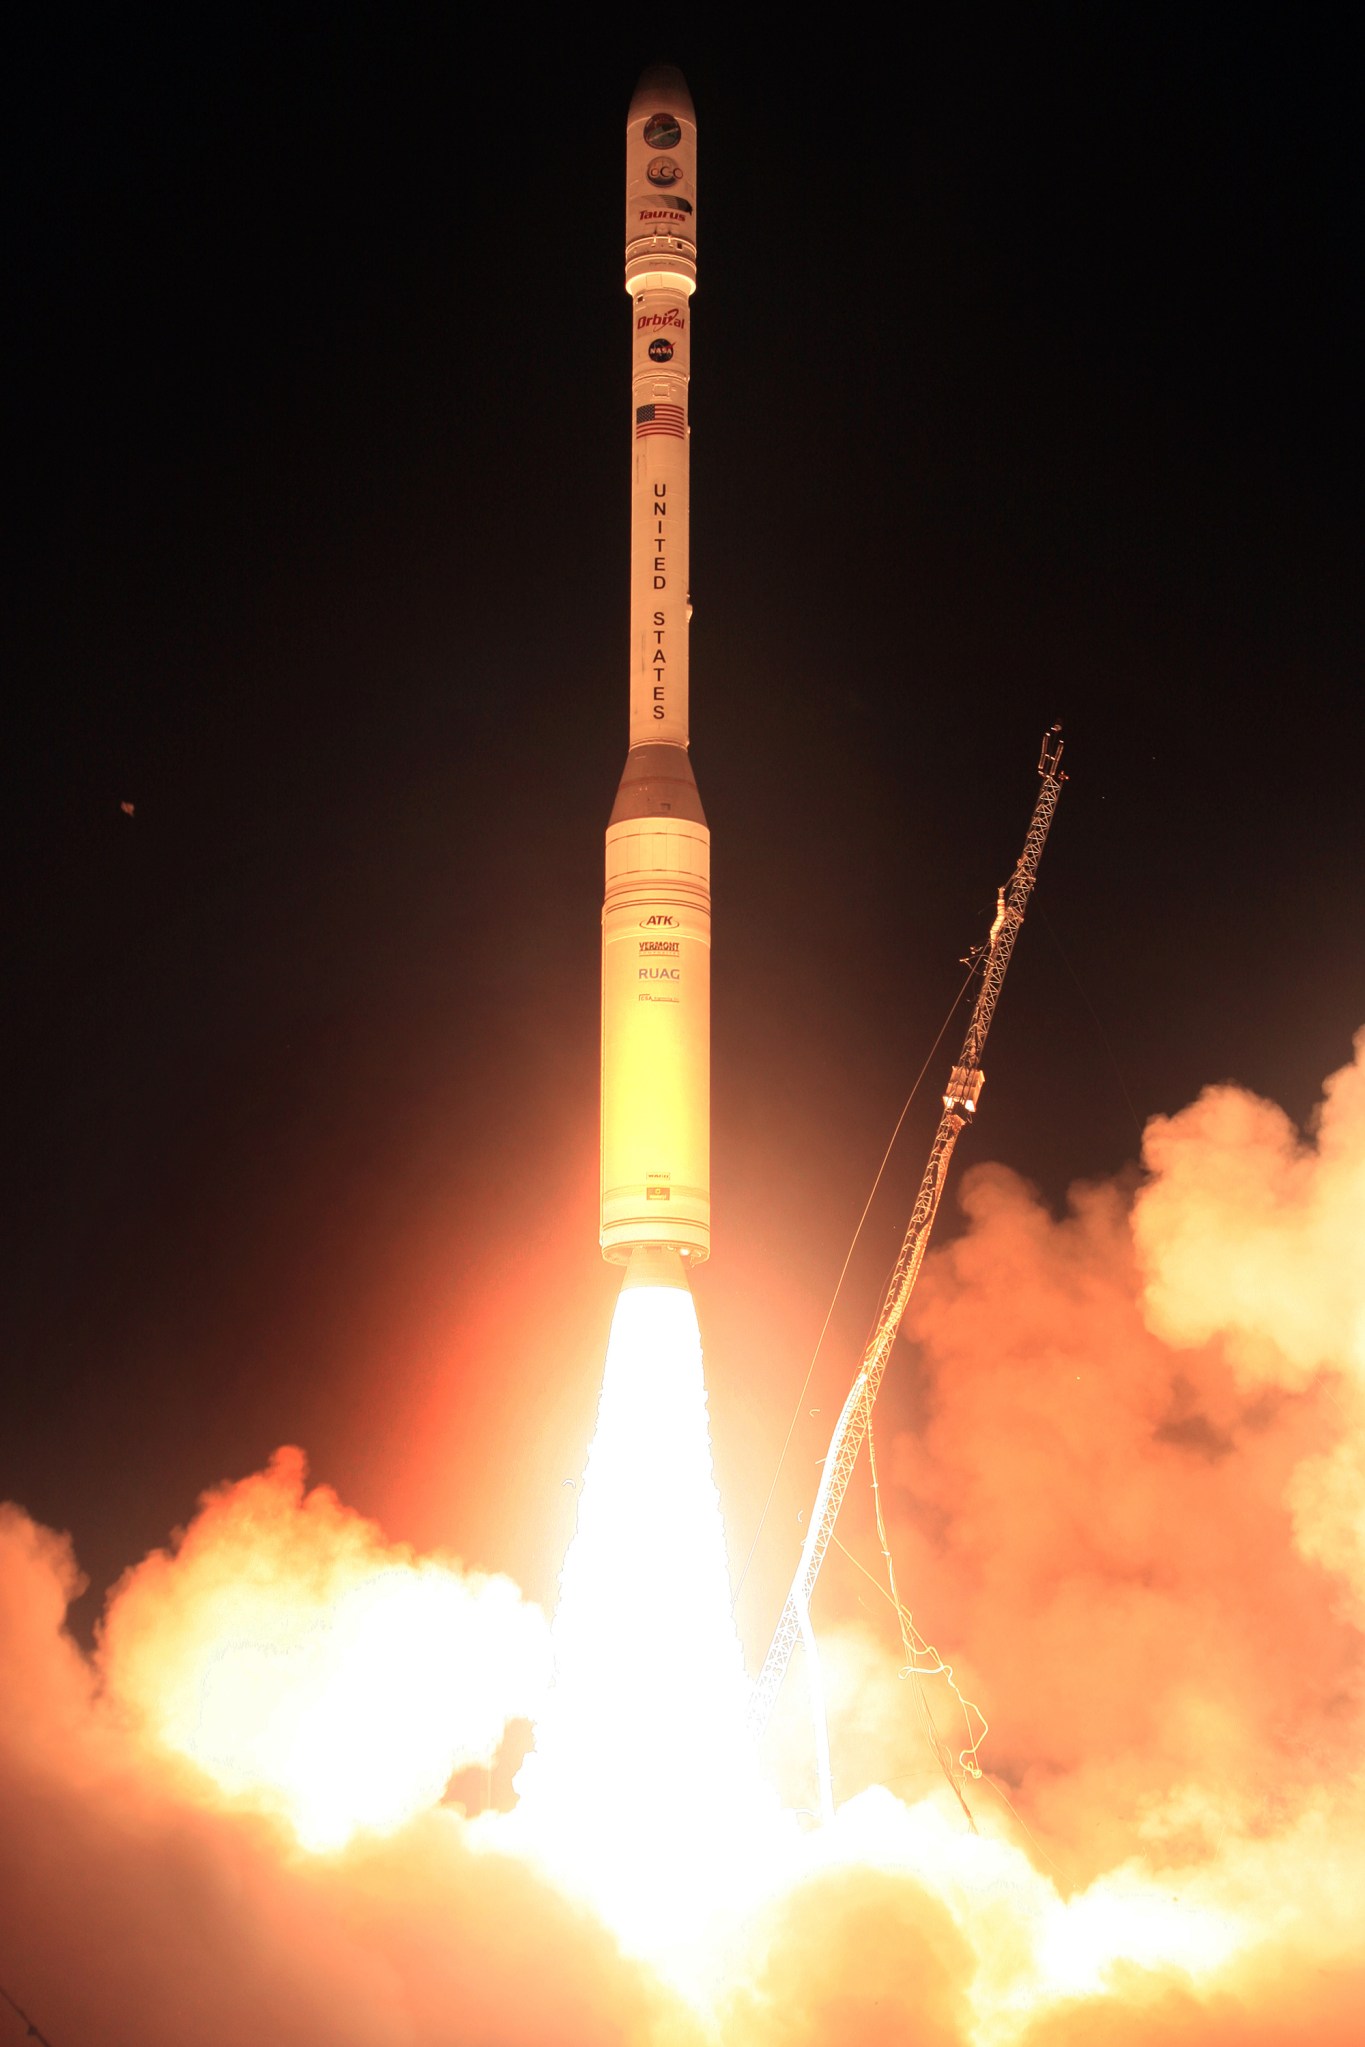 Launch of the Taurus Rocket carrying the OCO-1 spacecraft.